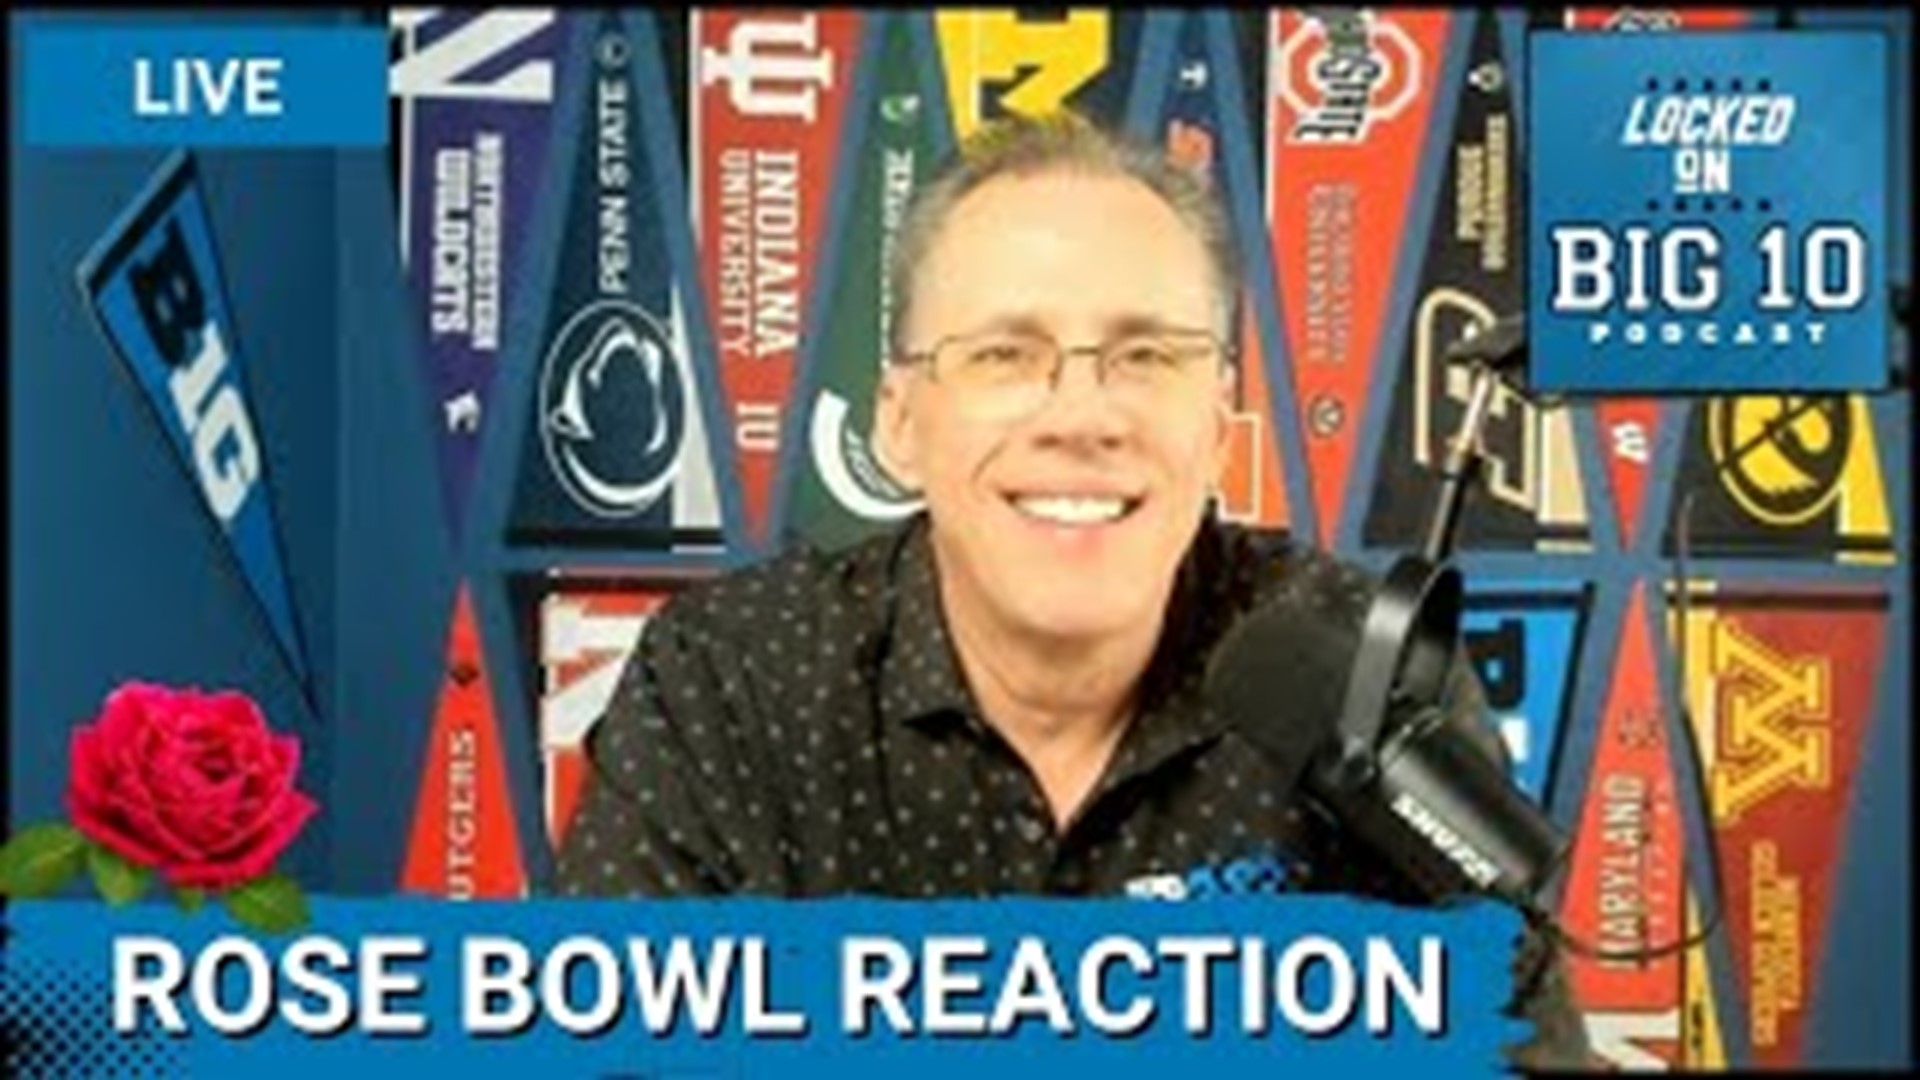 We have LIVE Postgame reaction to Michigan and Alabama in the Rose Bowl.  Plus we will take your comments and reaction on our LIVE Postgame show!